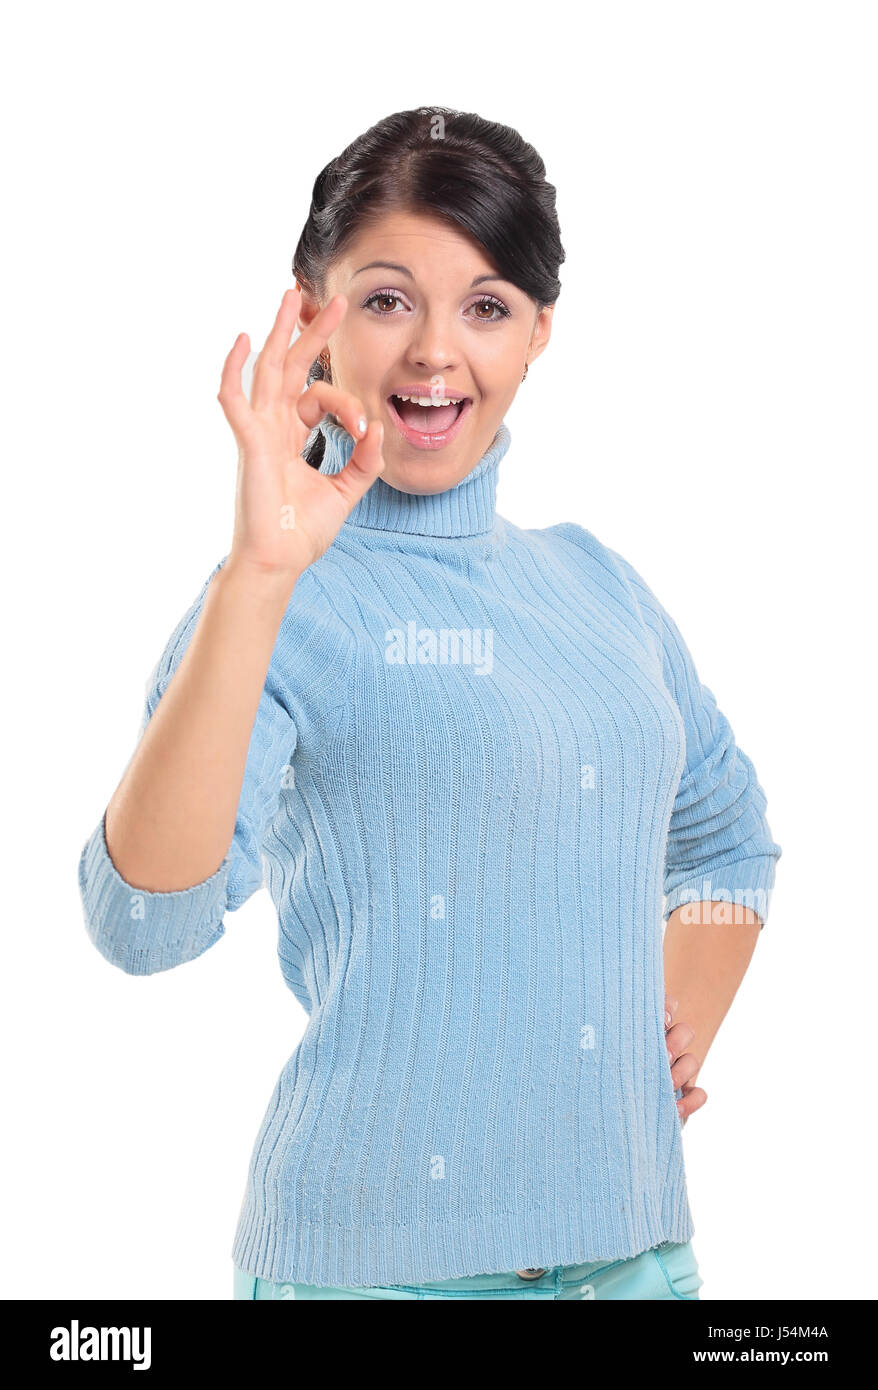 Attractive woman is showing okay sign with happiness. Stock Photo